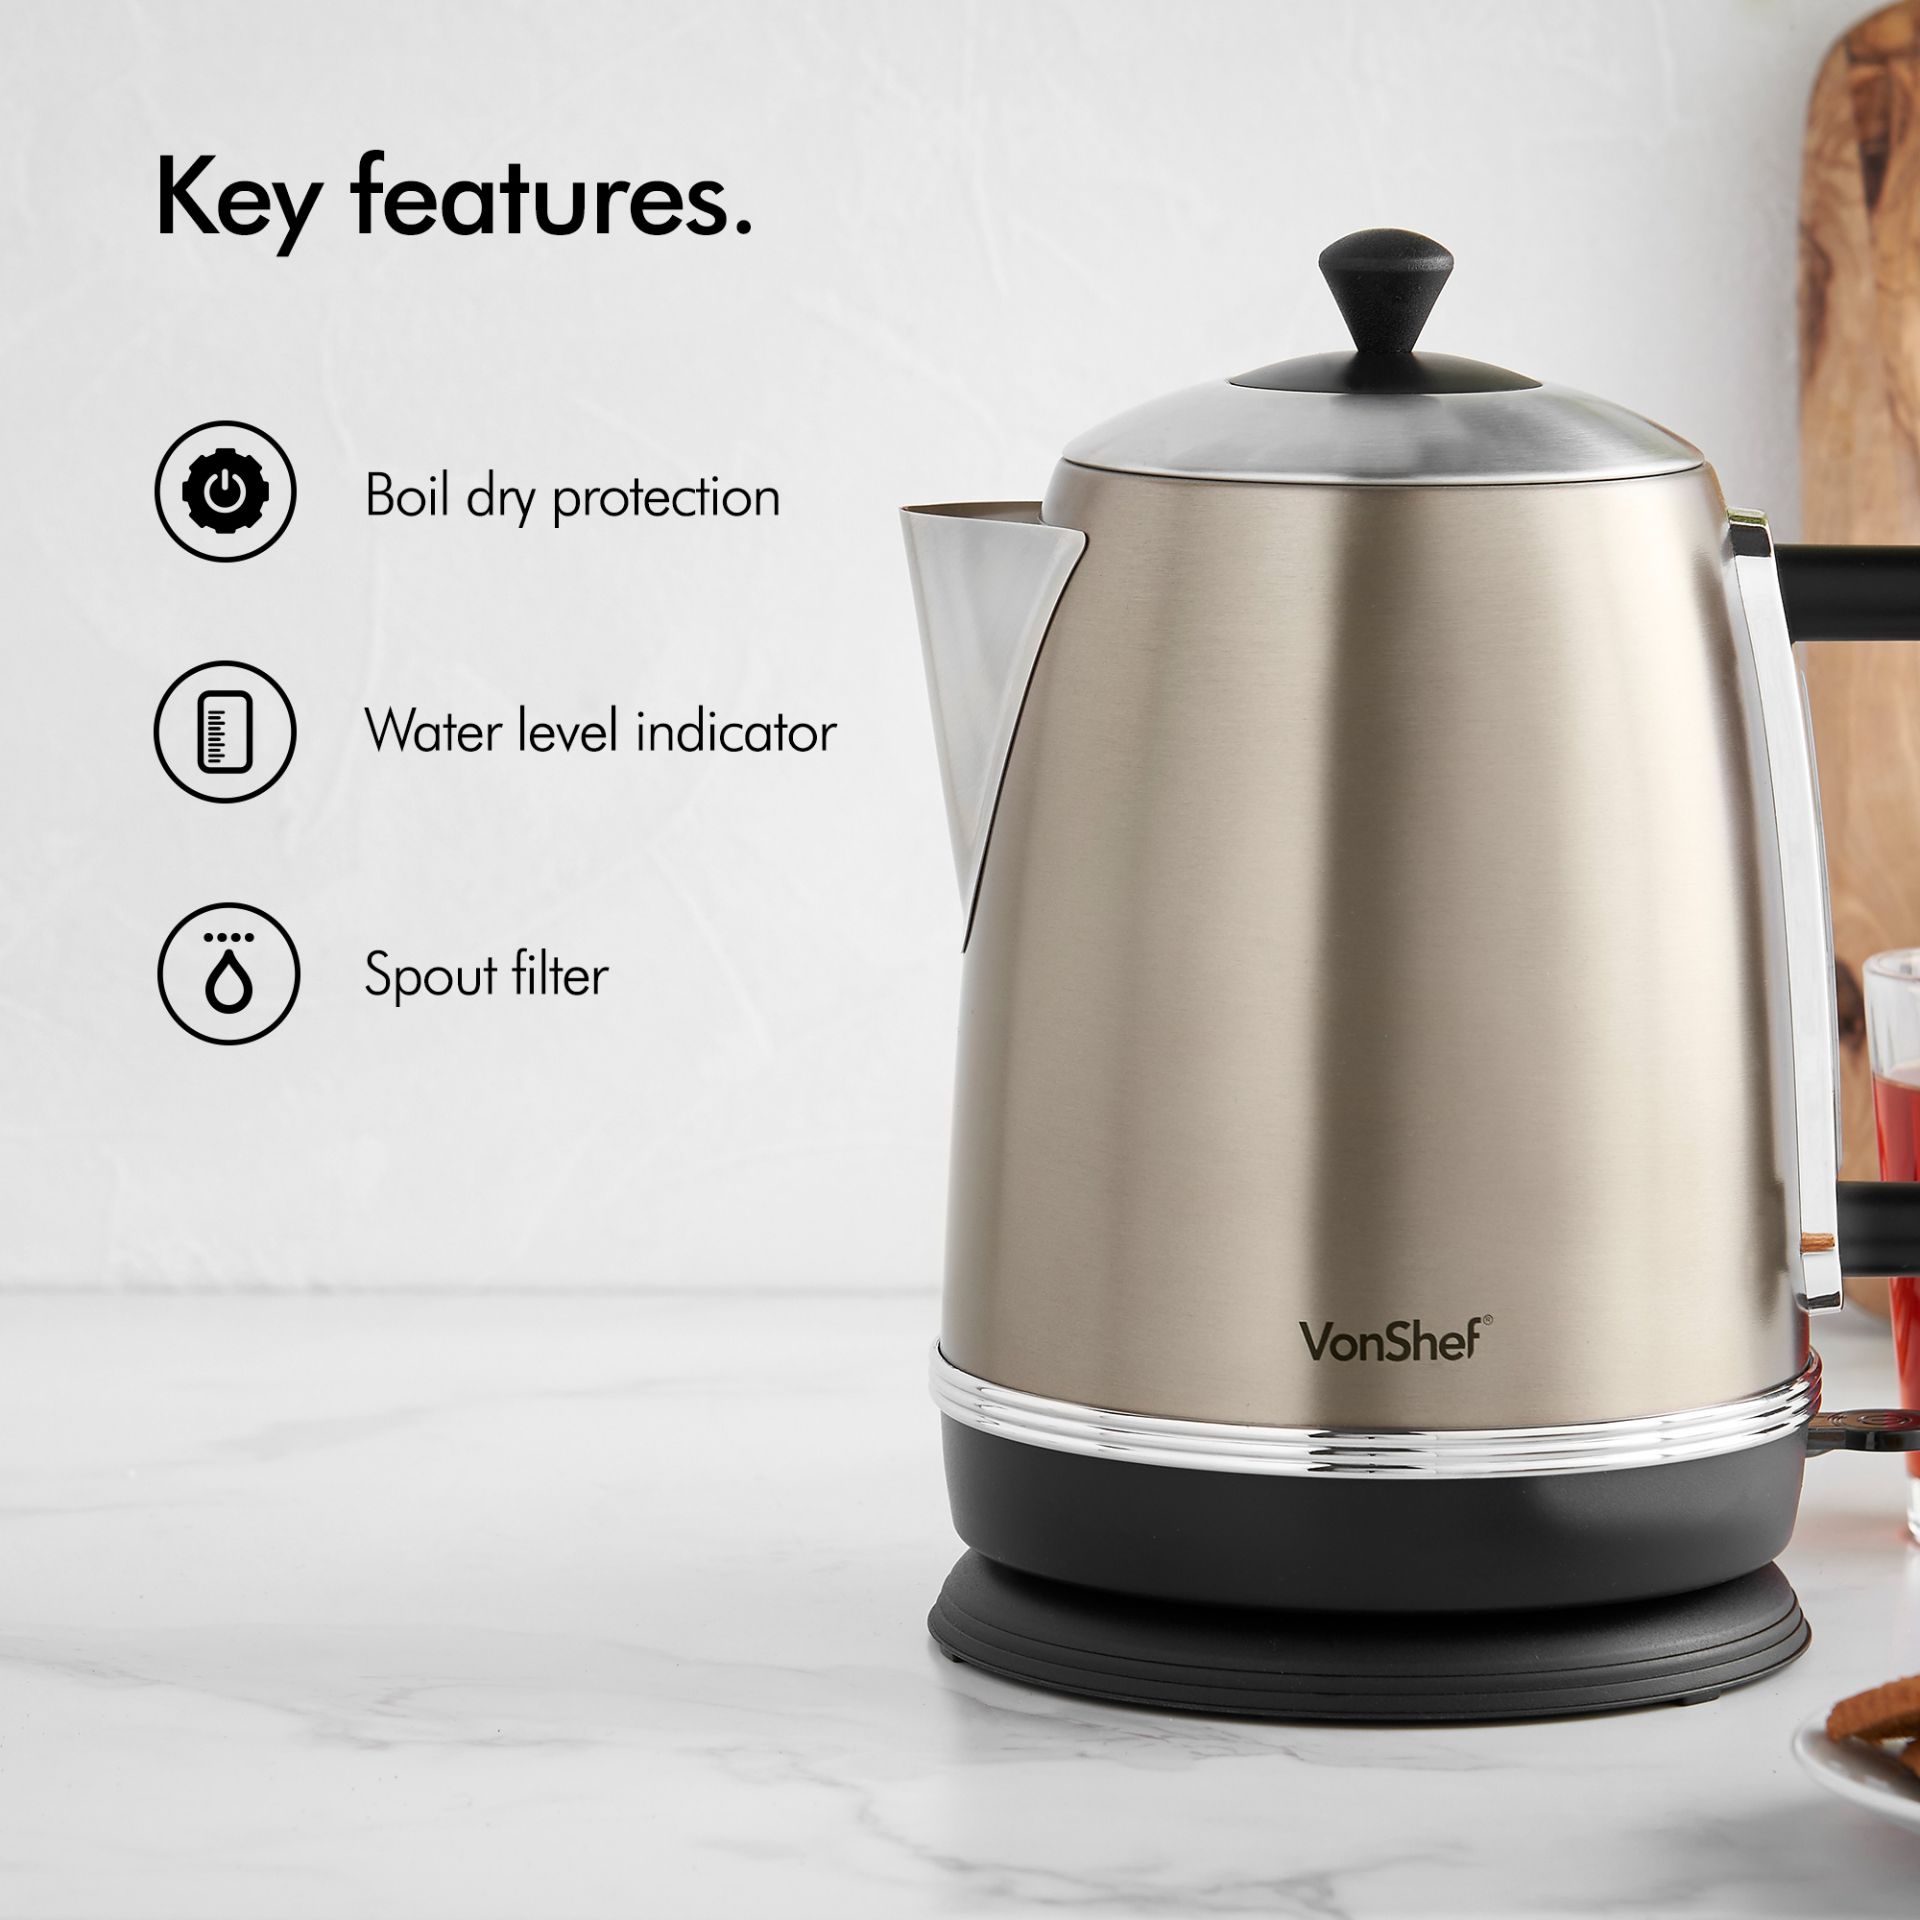 (V173) 1.7L Champagne Kettle. From morning brews to bedtime hot chocolates, your kettle is alw... - Image 2 of 2